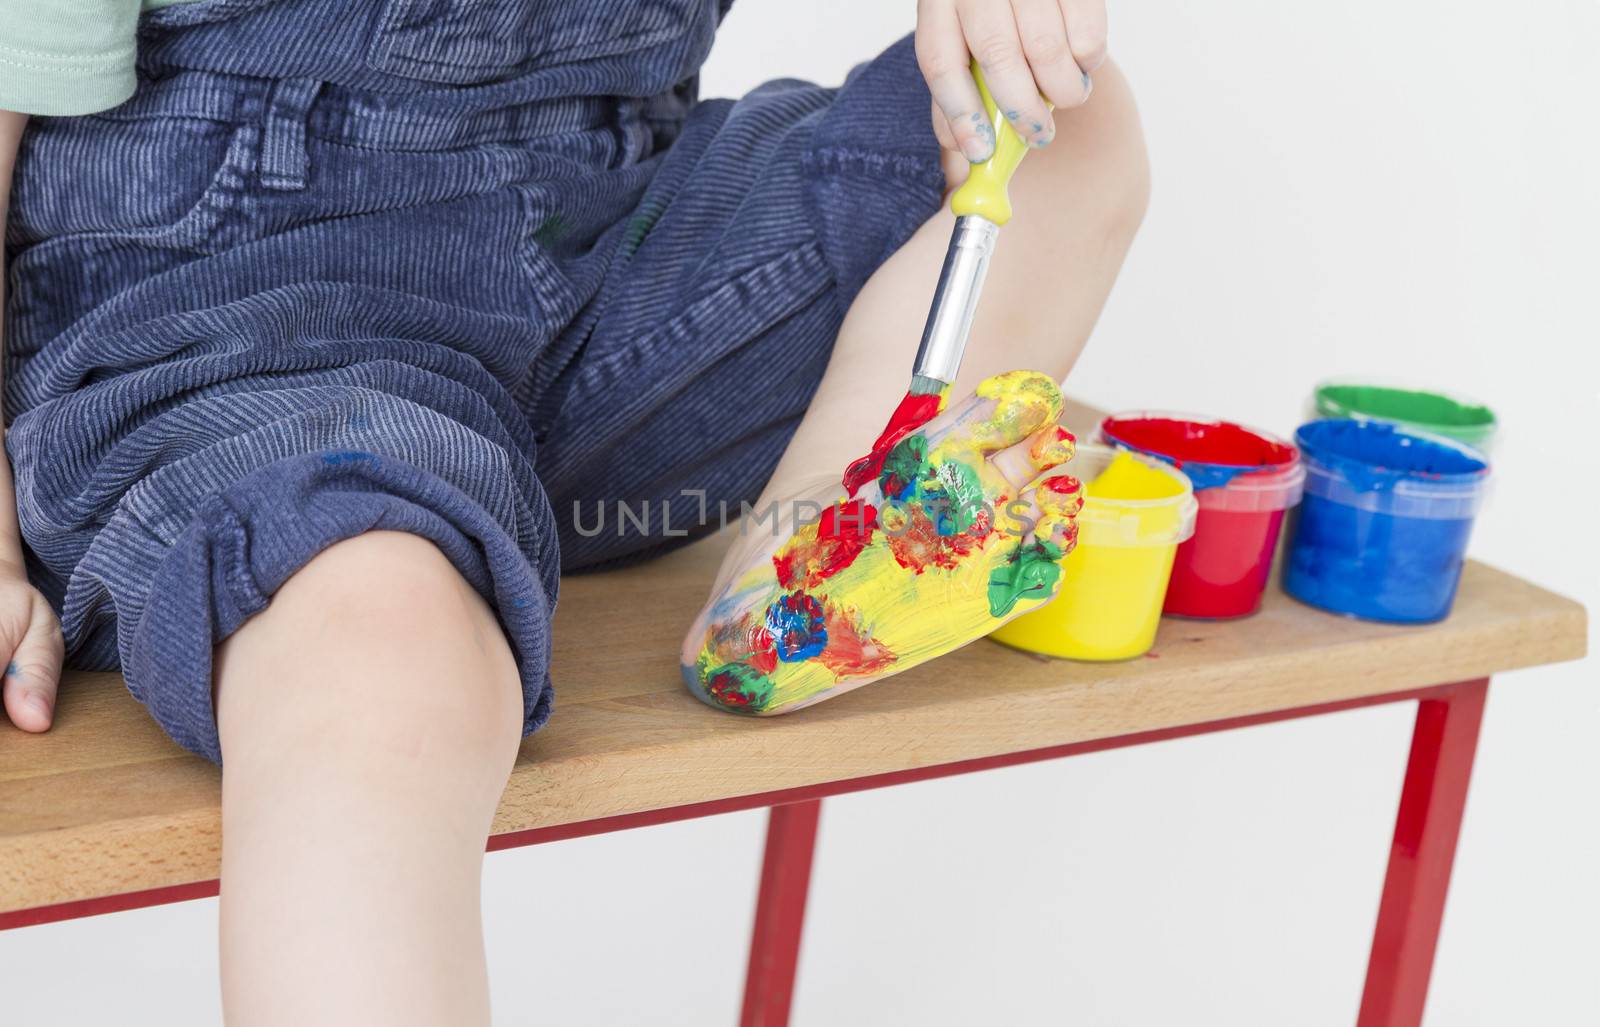 foot of child colorful painted with finger paint